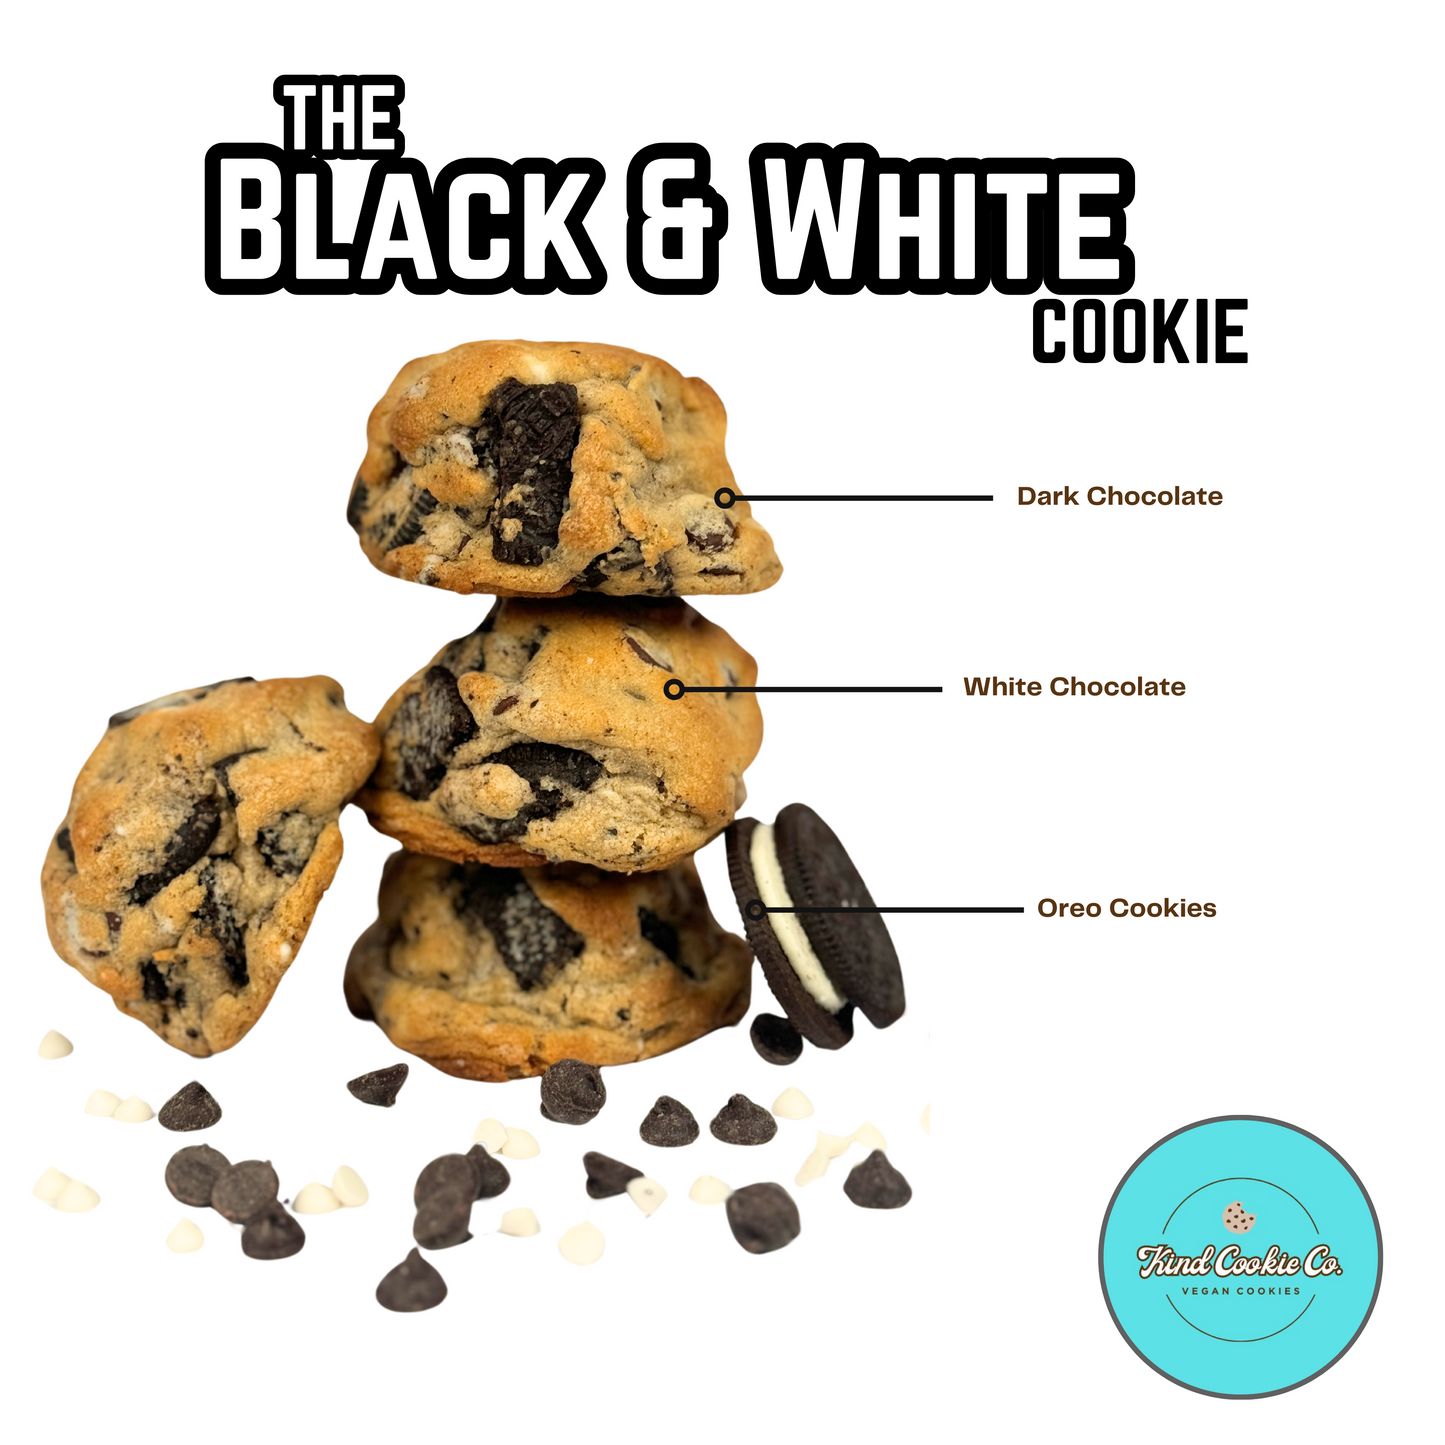 The Black & White Cookie